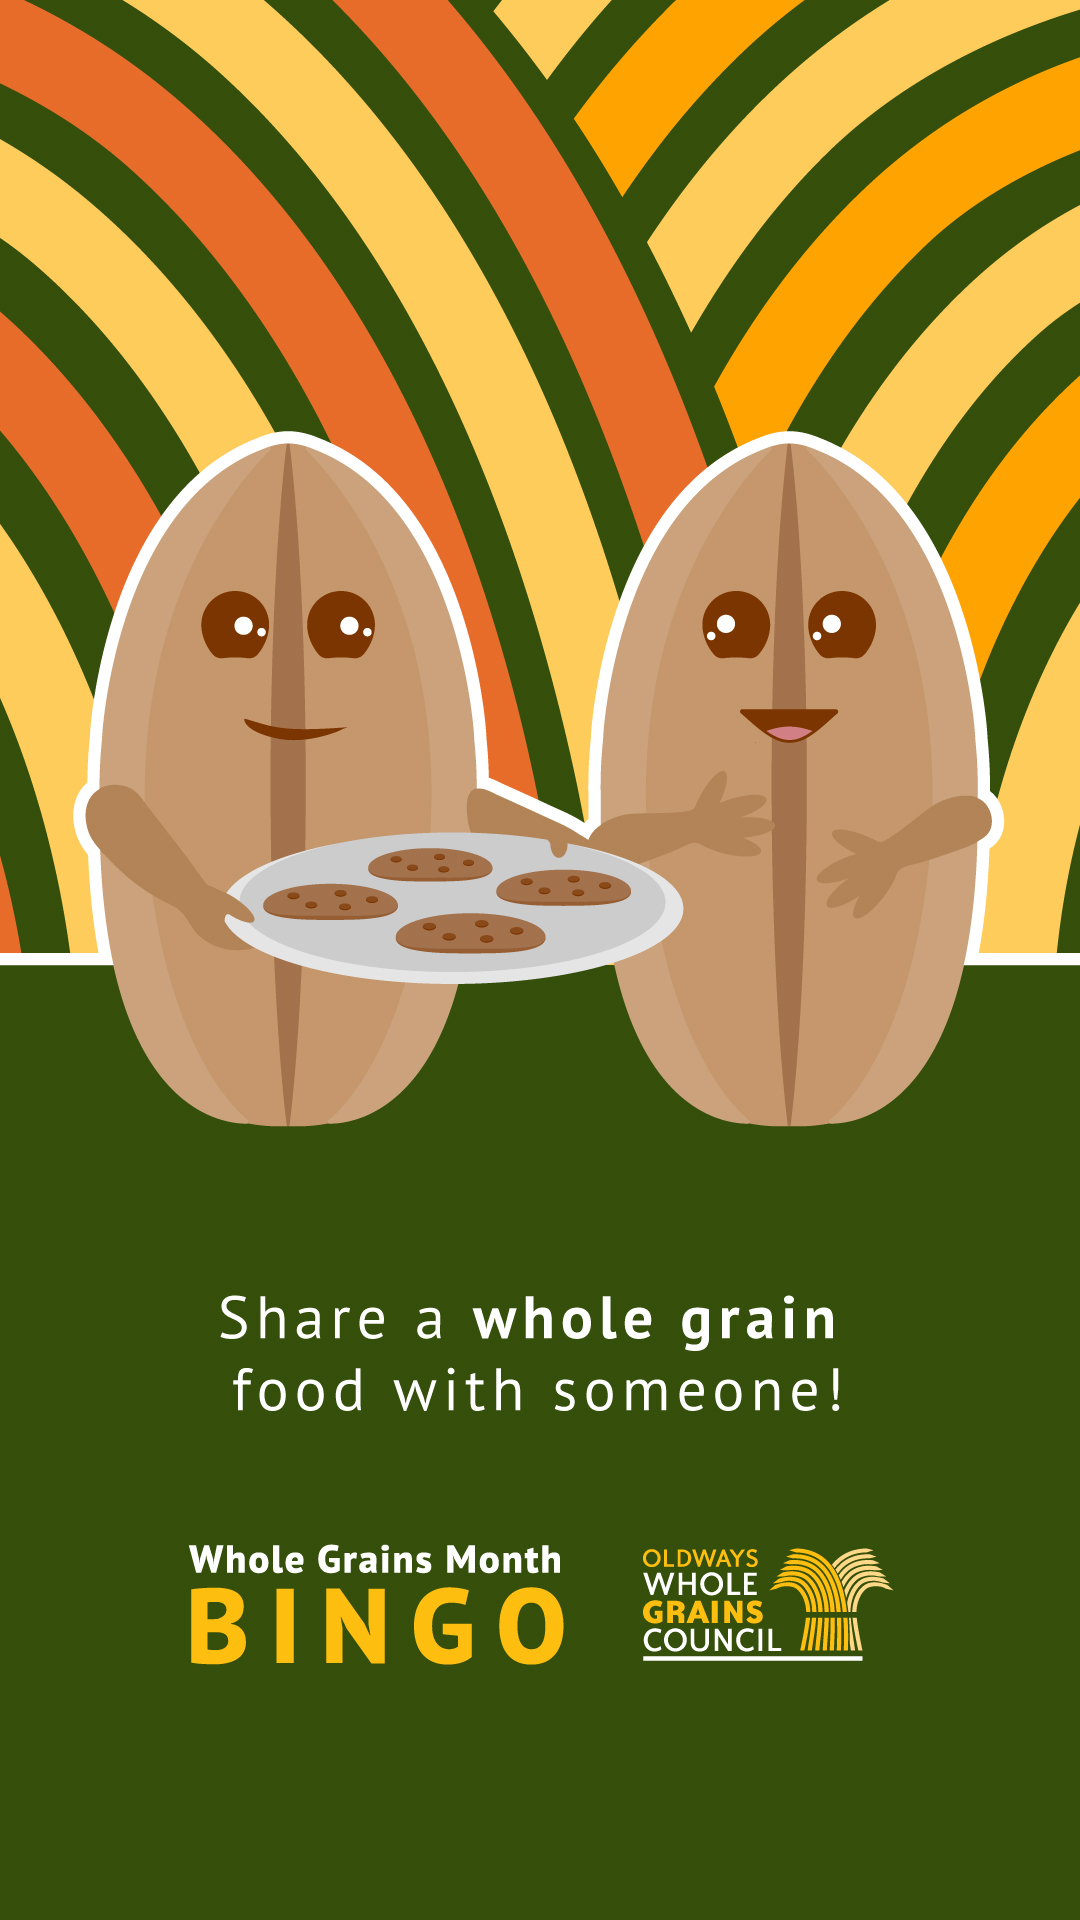 Whole Grains Month cookies